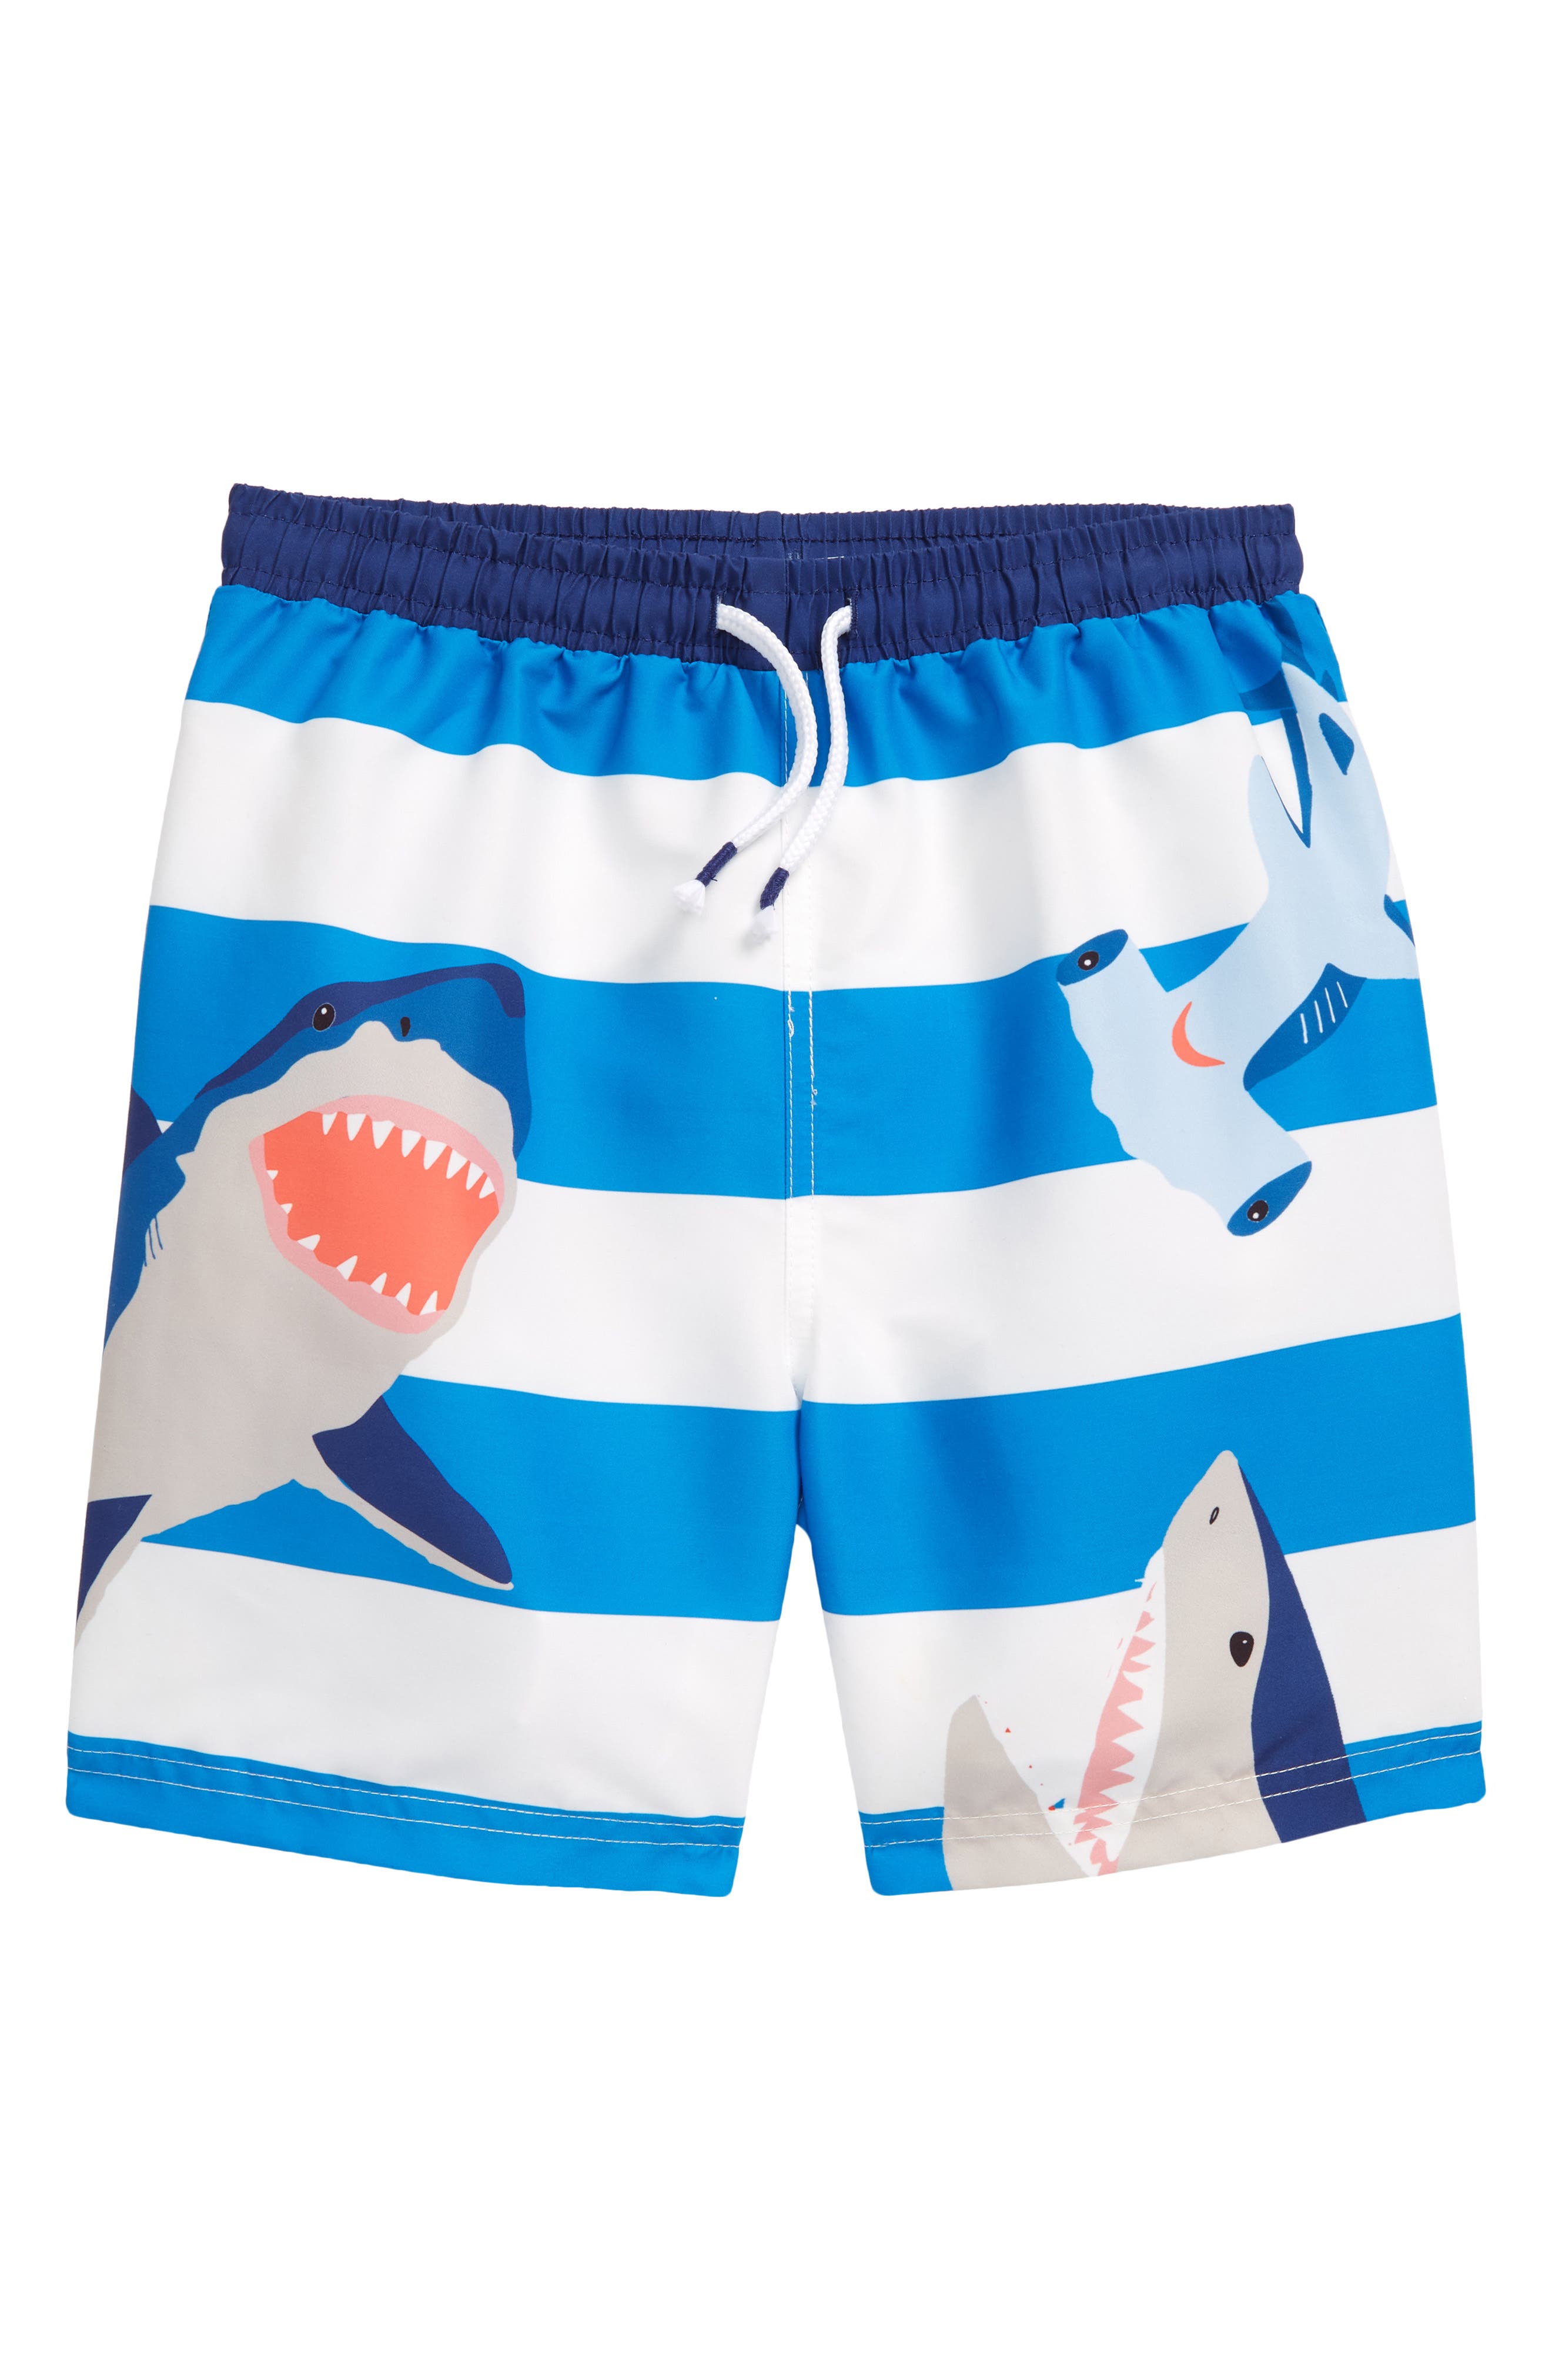 Youth Casual Training Sweatpants Toothy Great White Shark Fishing Logo Adjustable Waist Running Pants with Pocket